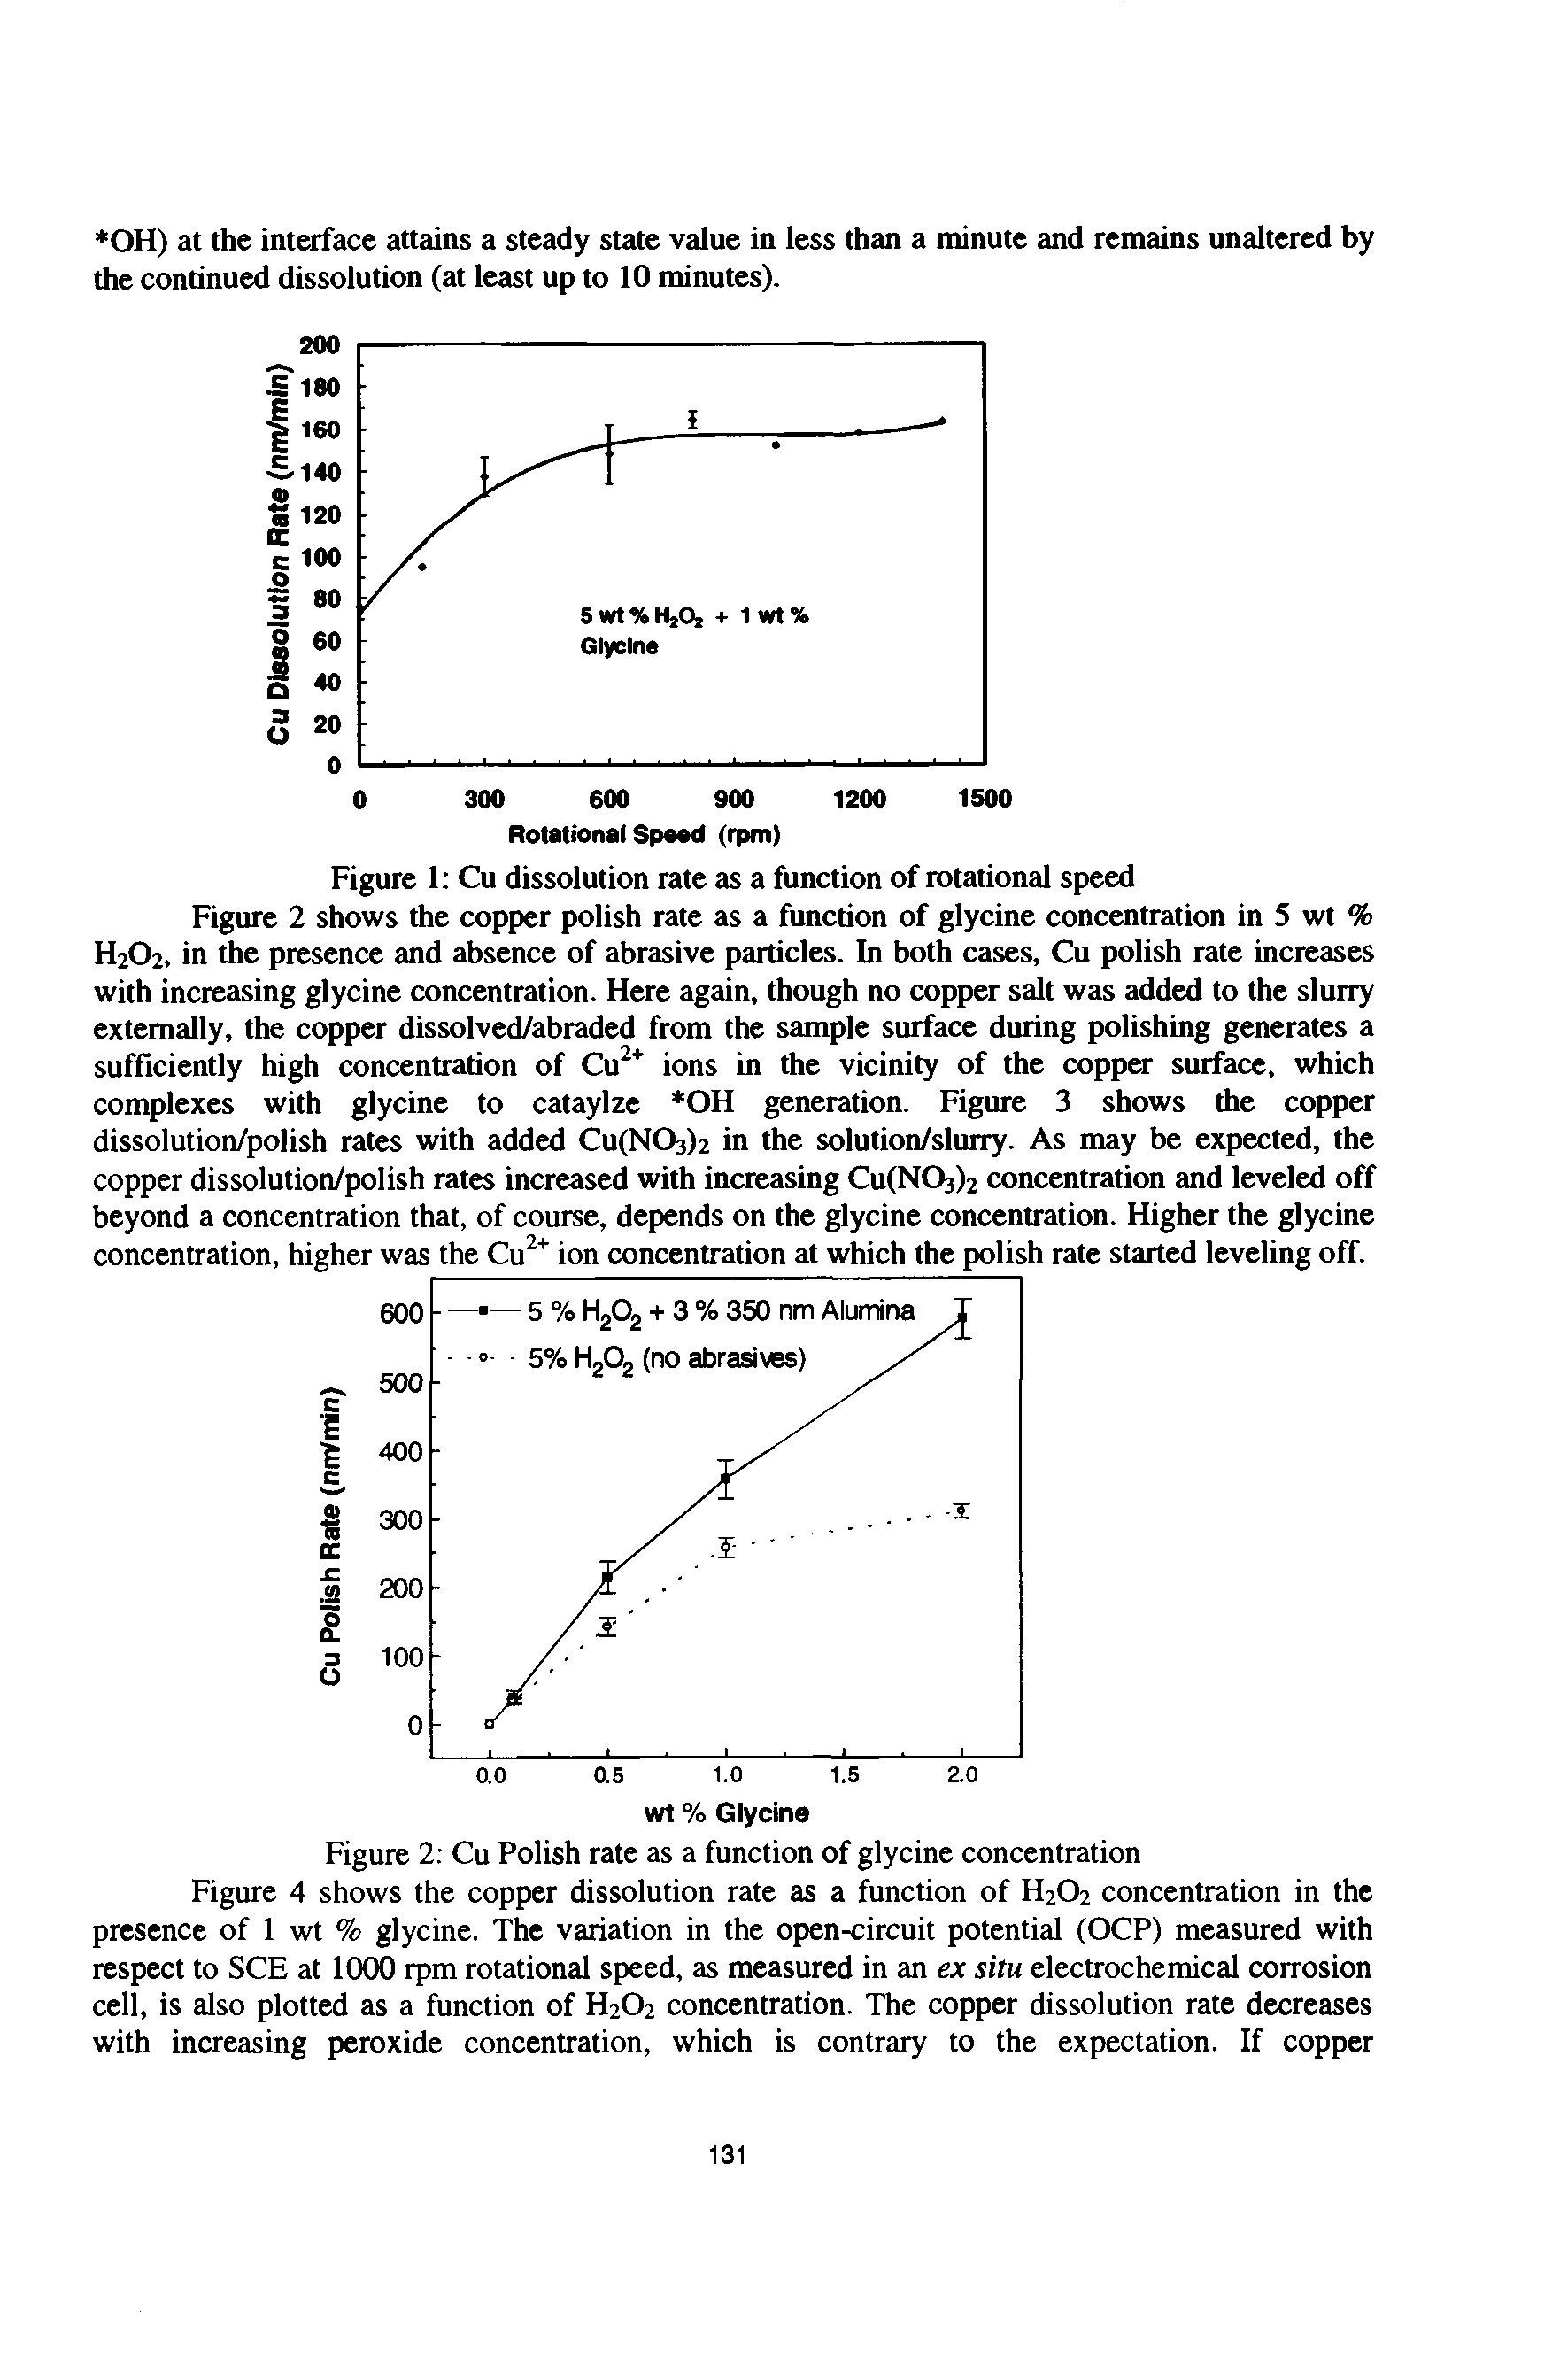 Figure 2 Cu Polish rate as a function of glycine concentration Figure 4 shows the copper dissolution rate as a function of H2O2 concentration in the presence of 1 wt % glycine. The variation in the open-circuit potential (OCP) measured with respect to SCE at KXK) rpm rotational speed, as measured in an ex situ electrochemical corrosion cell, is also plotted as a function of H2O2 concentration. The copper dissolution rate decreases with increasing peroxide concentration, which is contrary to the expectation. If copper...